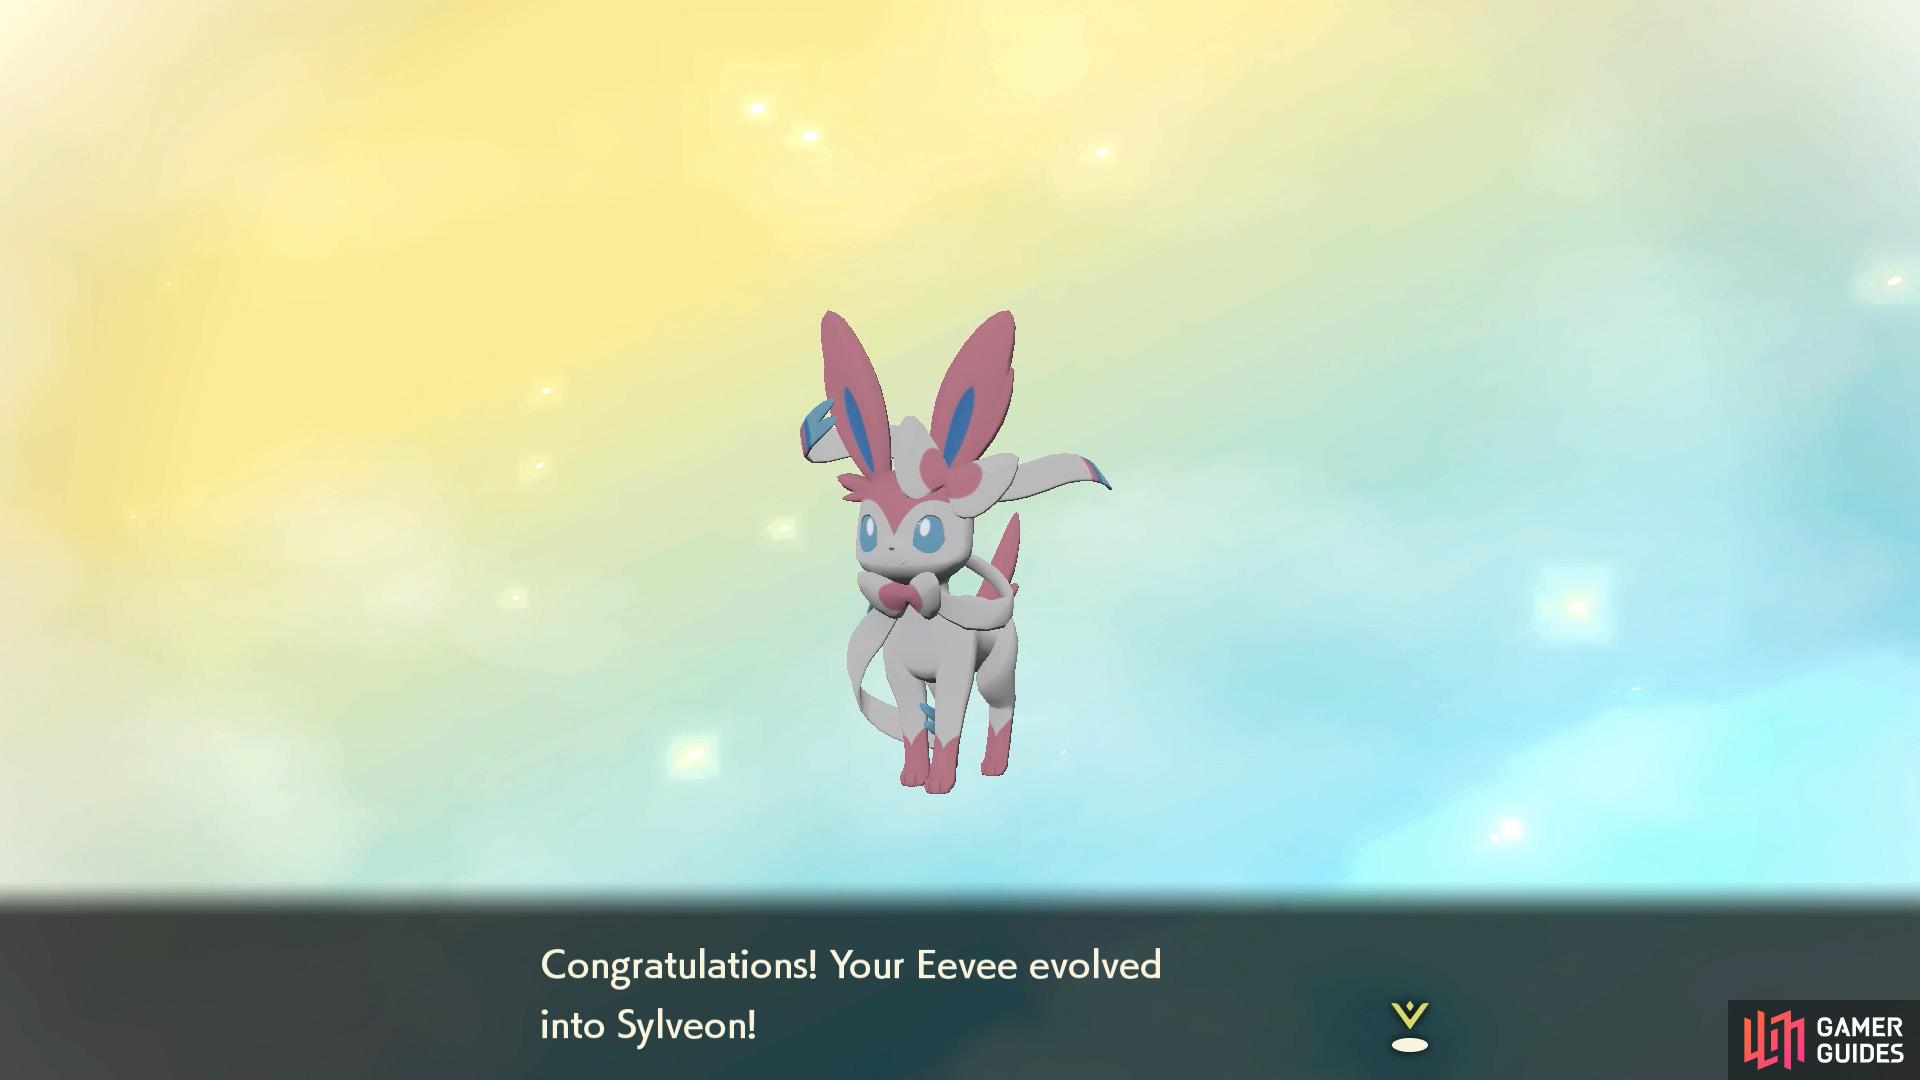 Once Eevee is friendly enough, it'll evolve into Sylveon instead of Espeon/Umbreon.